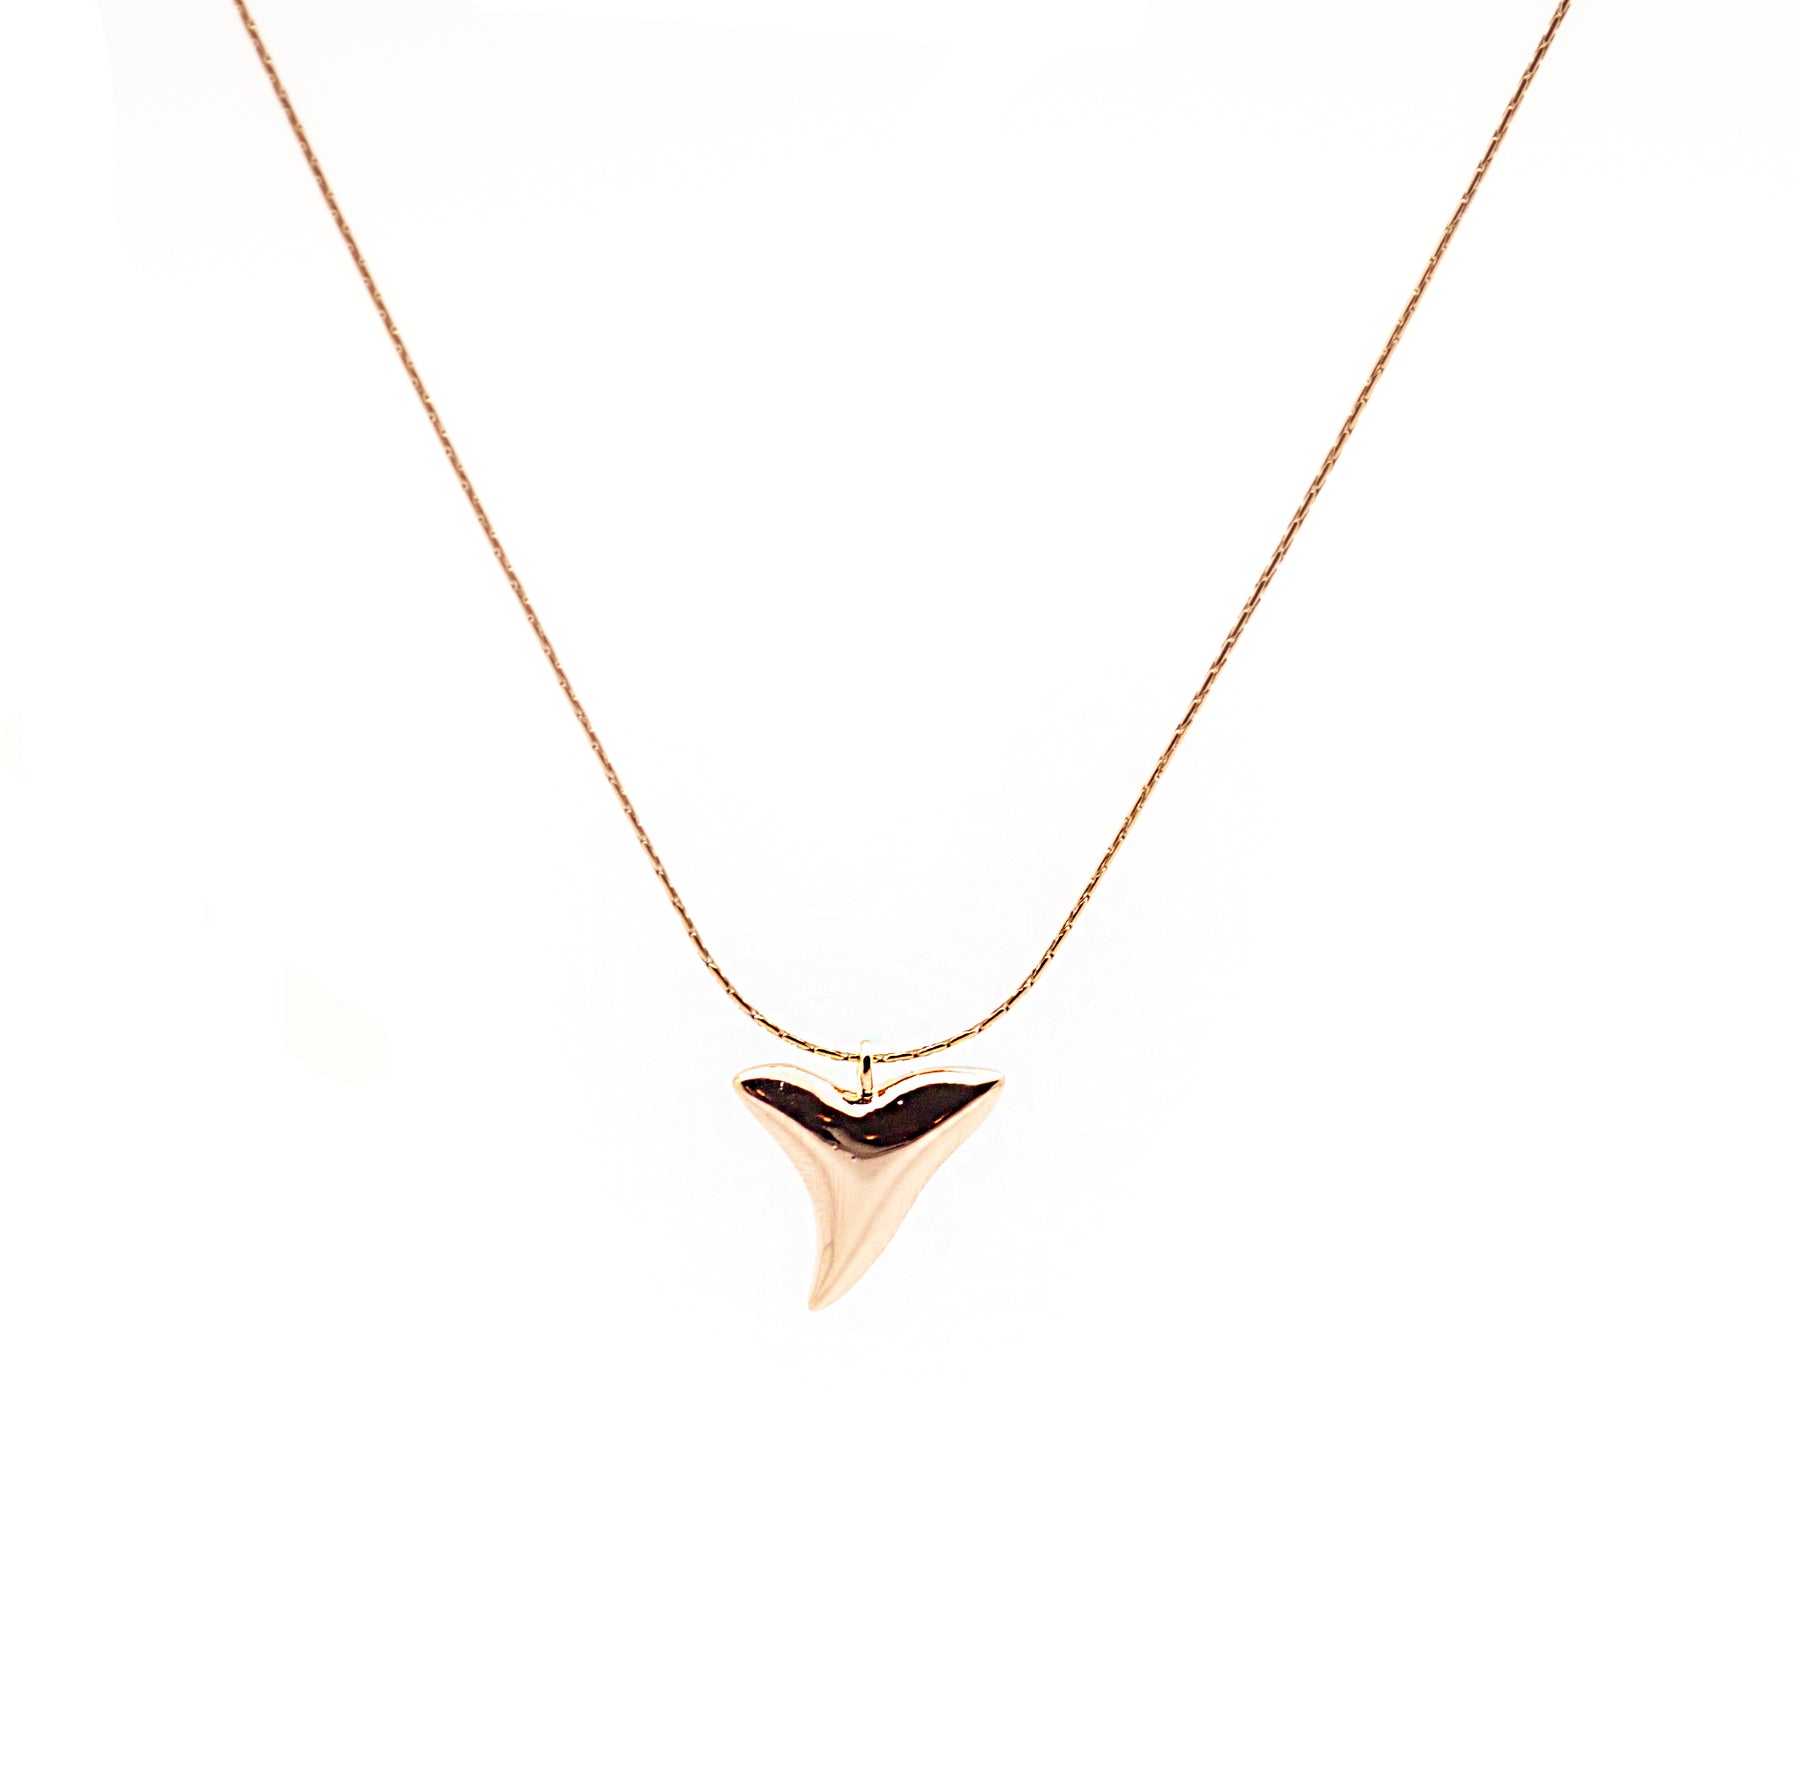 Salty Cali Shark Tooth Necklace